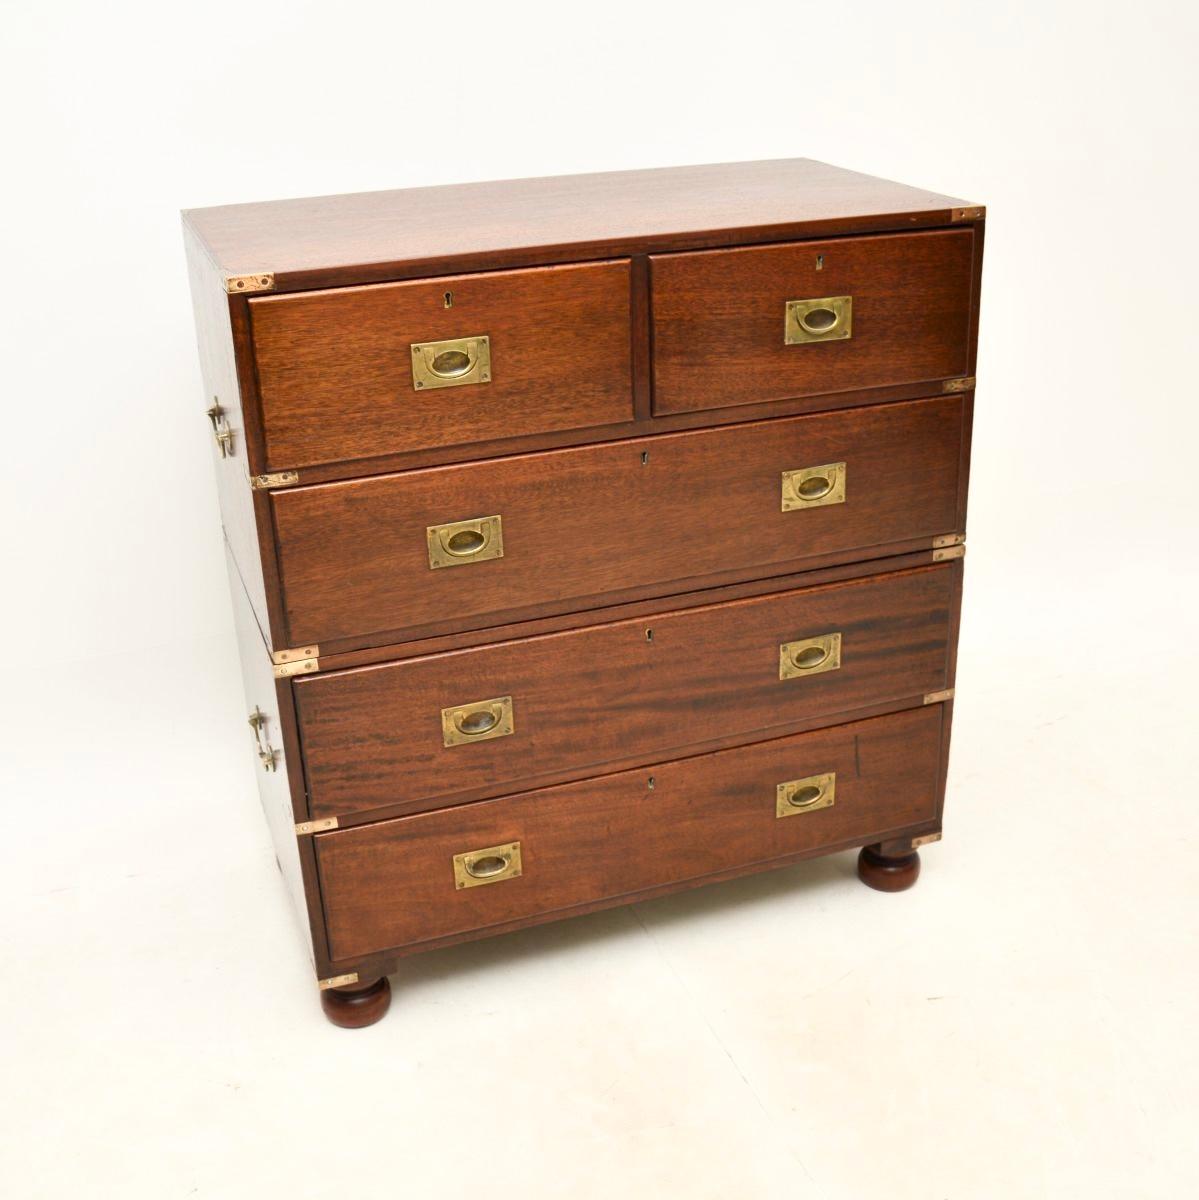 A smart and very well made antique military campaign chest of drawers. This was made in England, it dates from around the 1920-30’s.

It is of superb quality and is a great size, the top half lifts off the bottom half for ease of transport. The wood